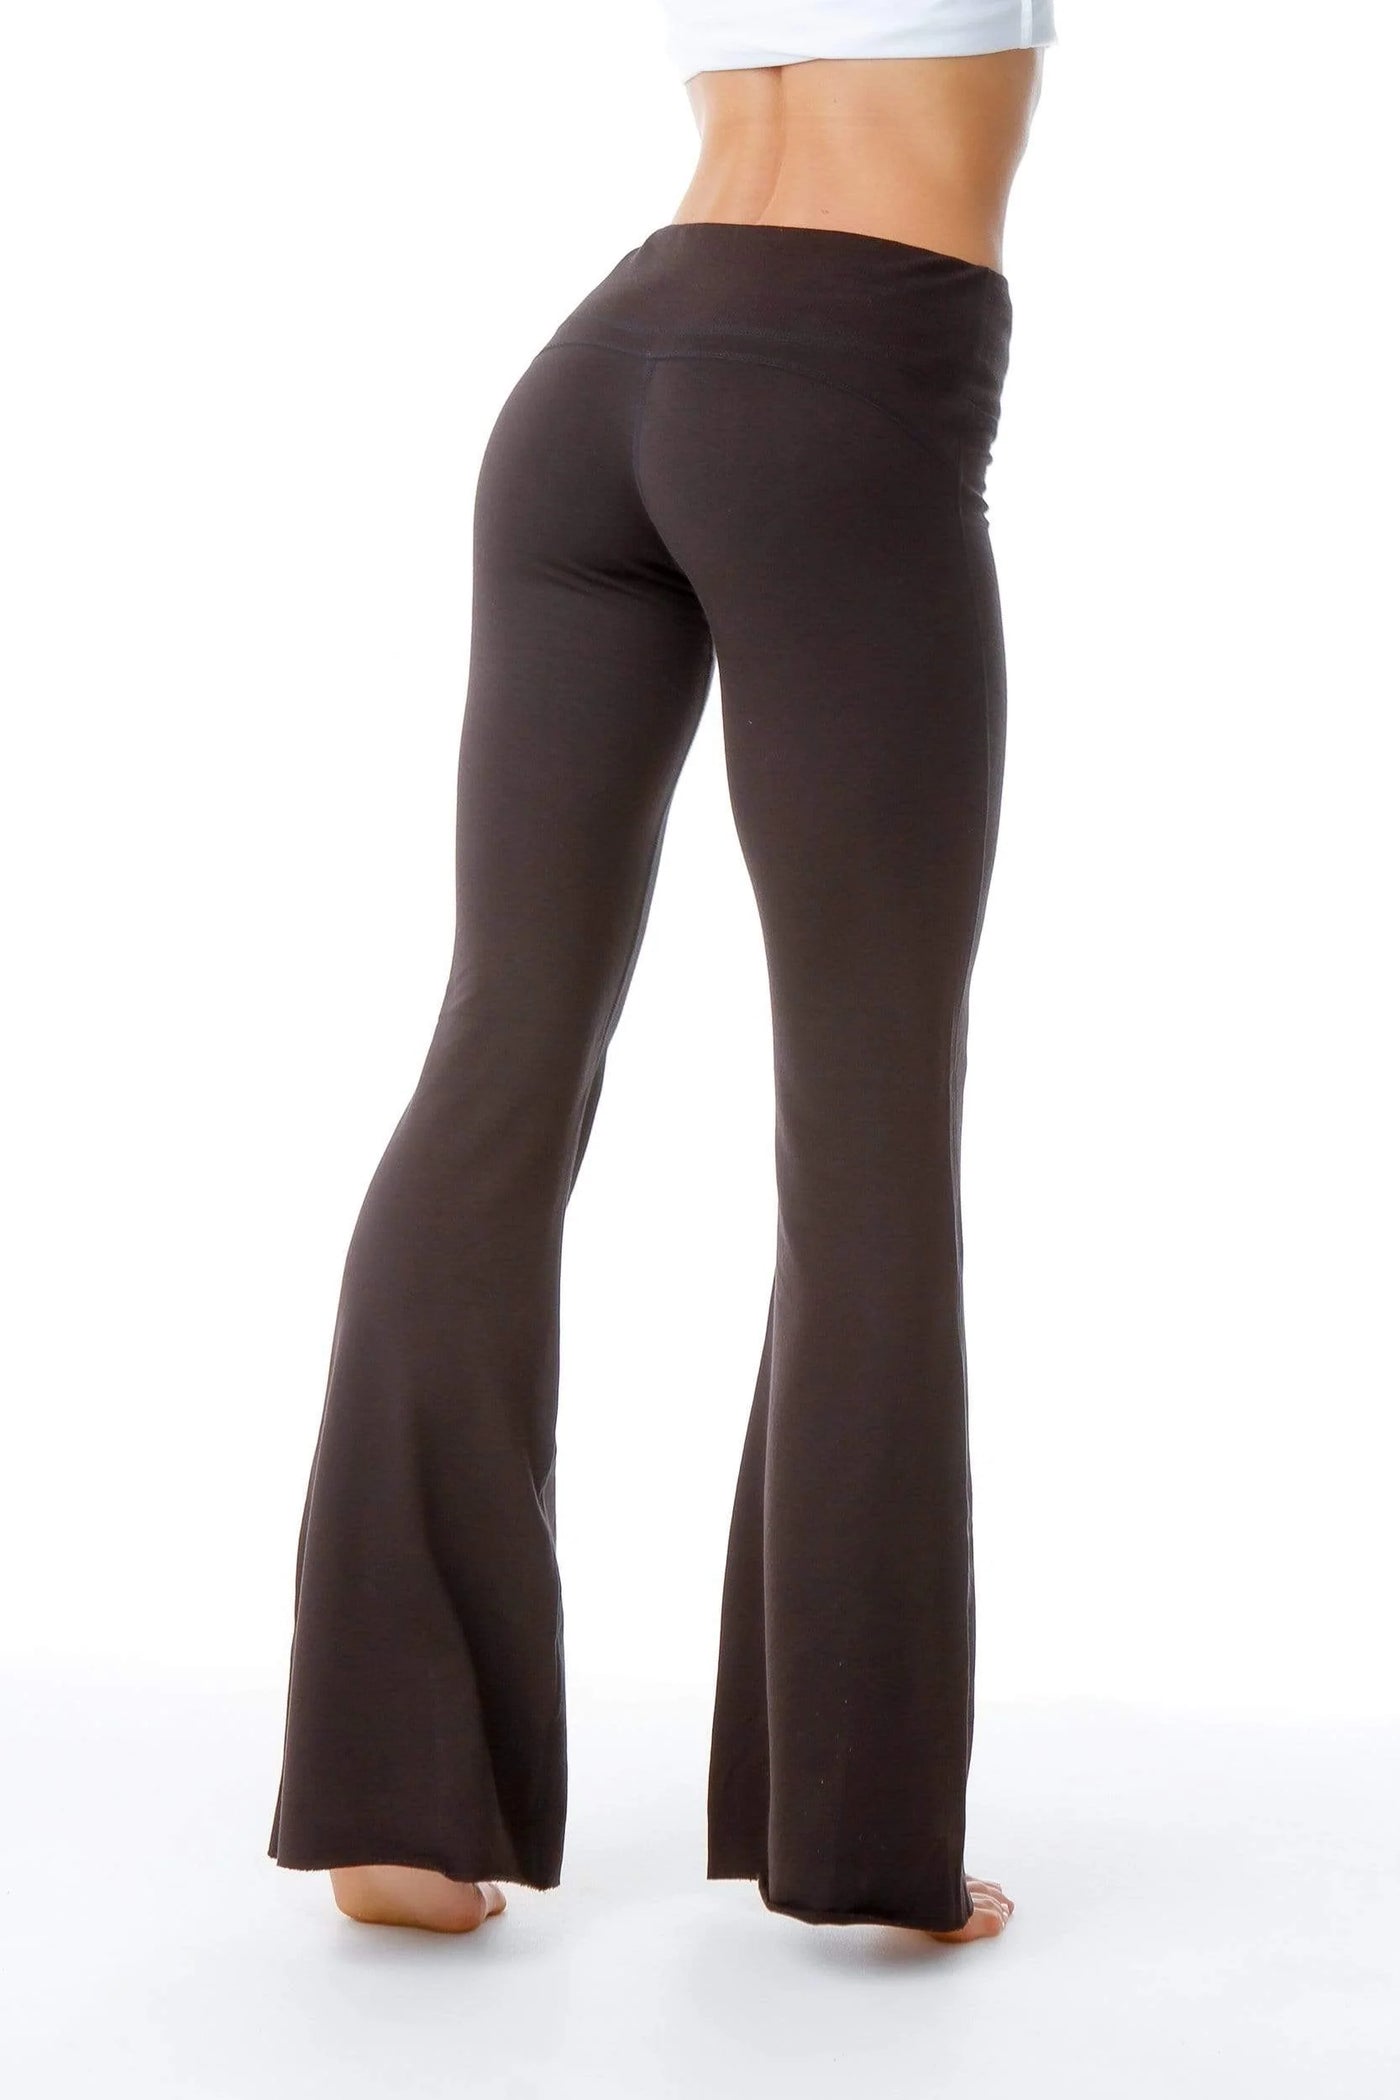 Green Apple Clare (Fitted) Yoga Pant - High Rise